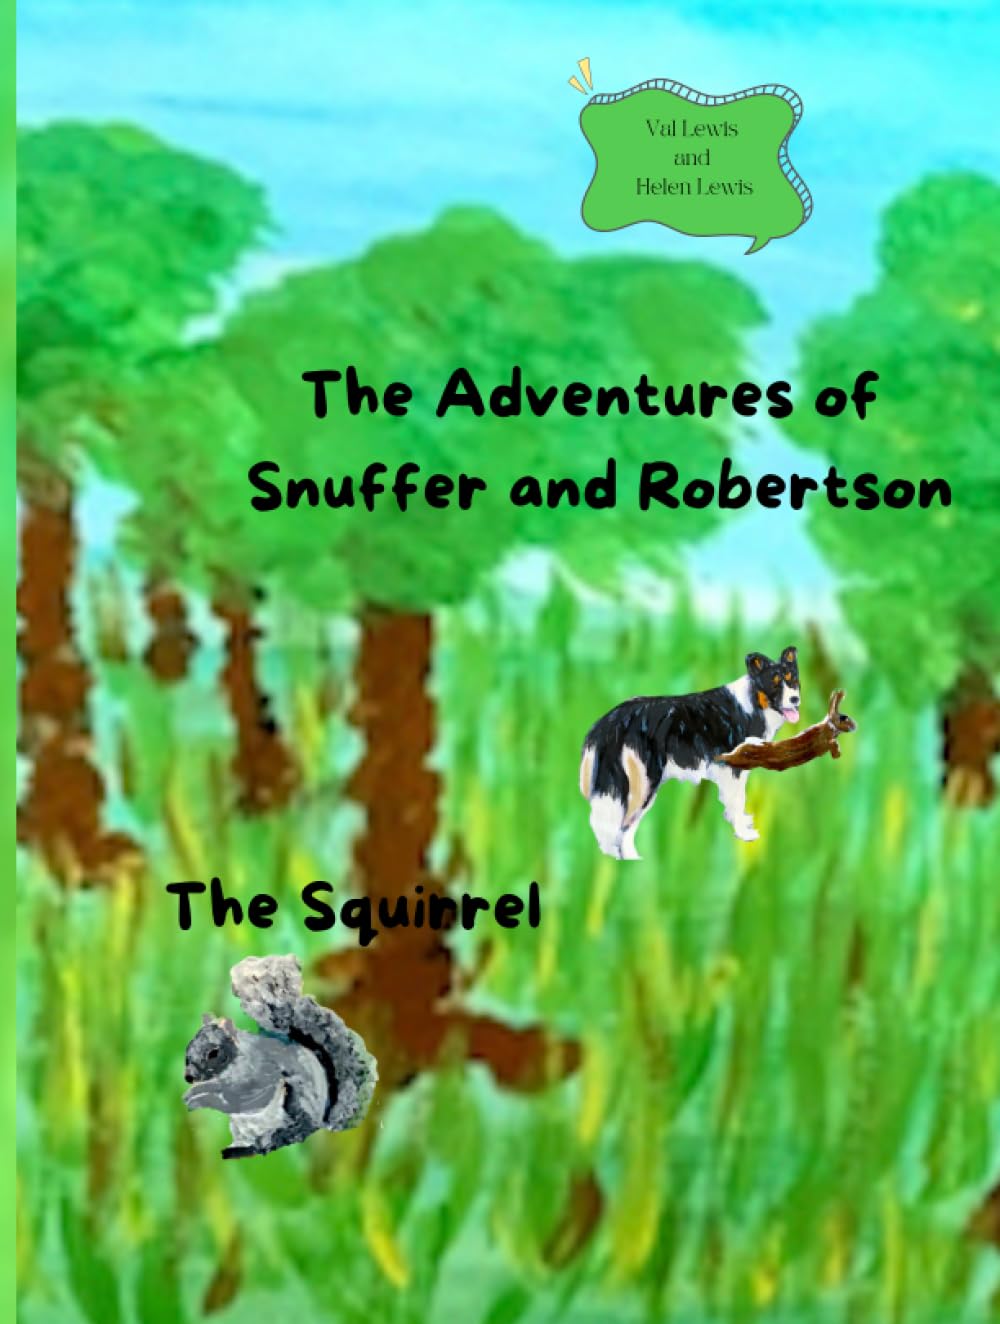 snuffer-and-robertson-storybook-image